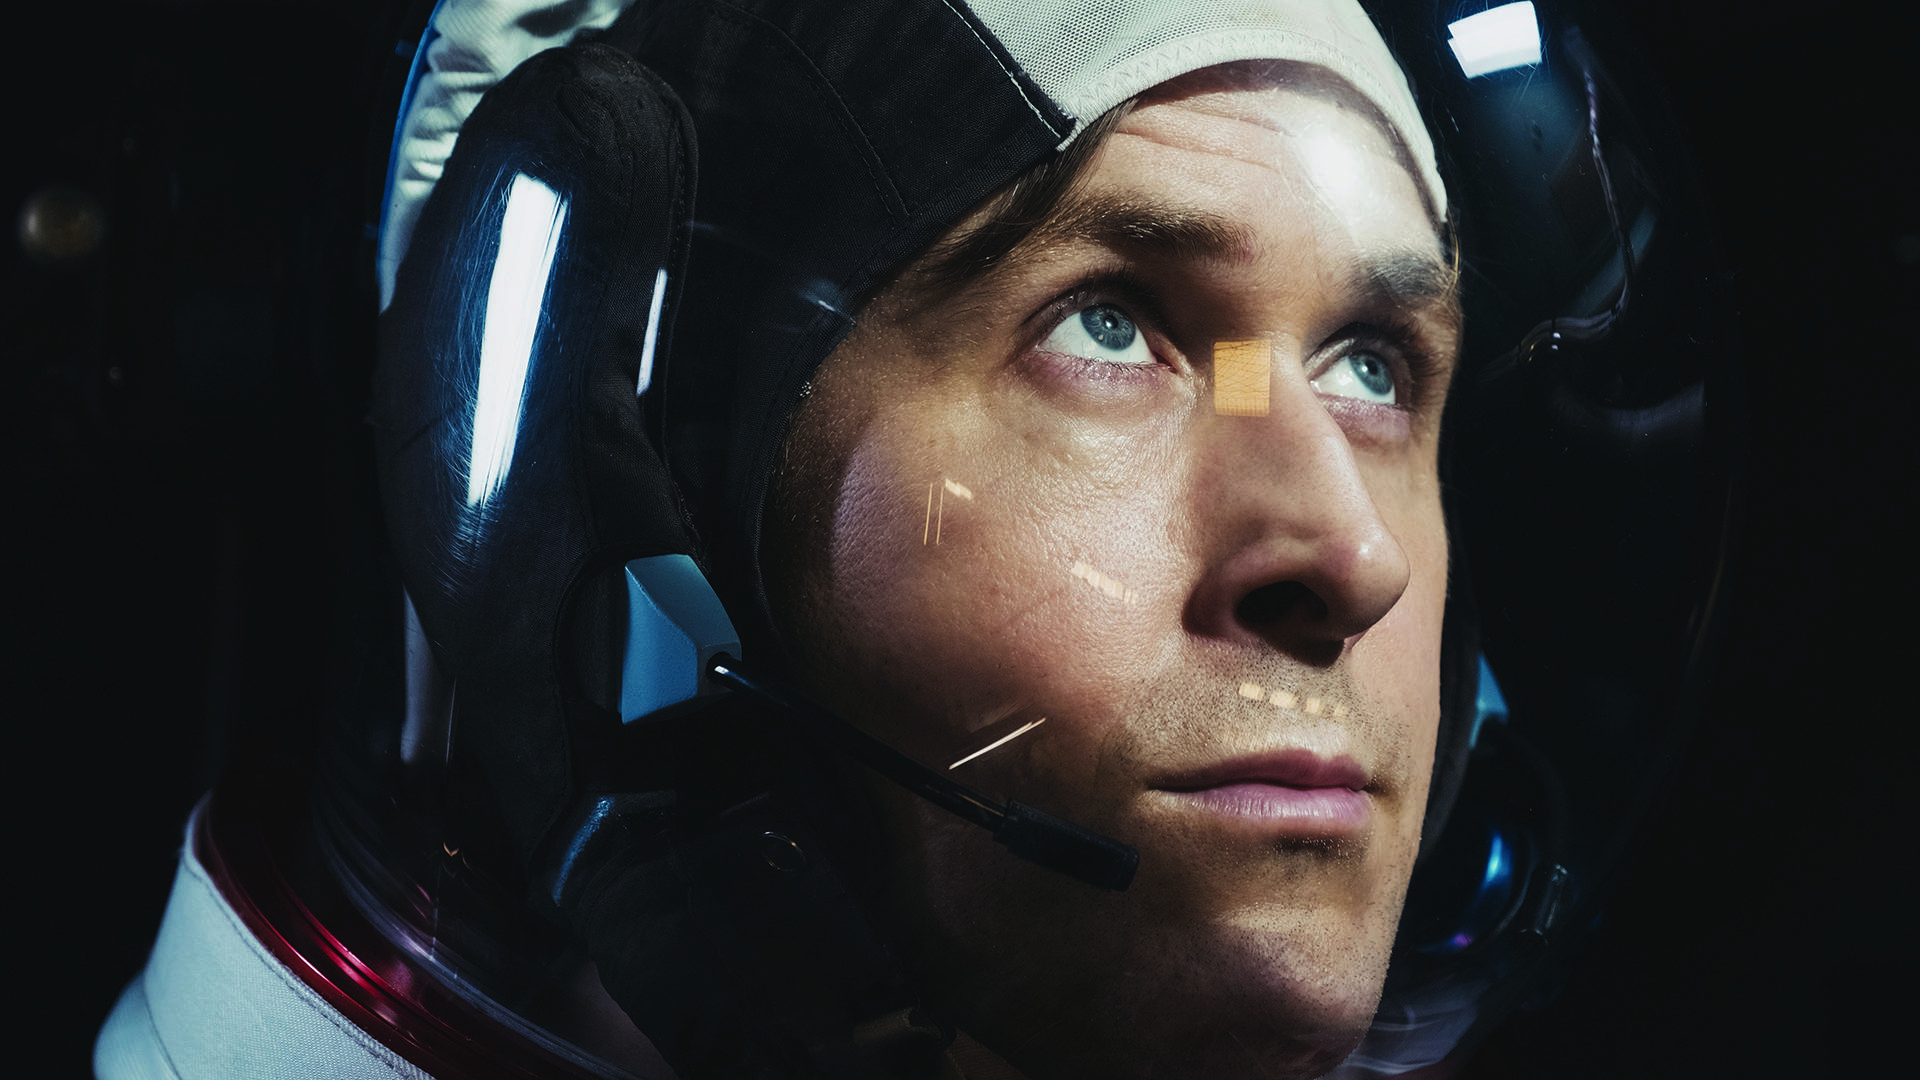 First Man 2018 Movie Wallpapers